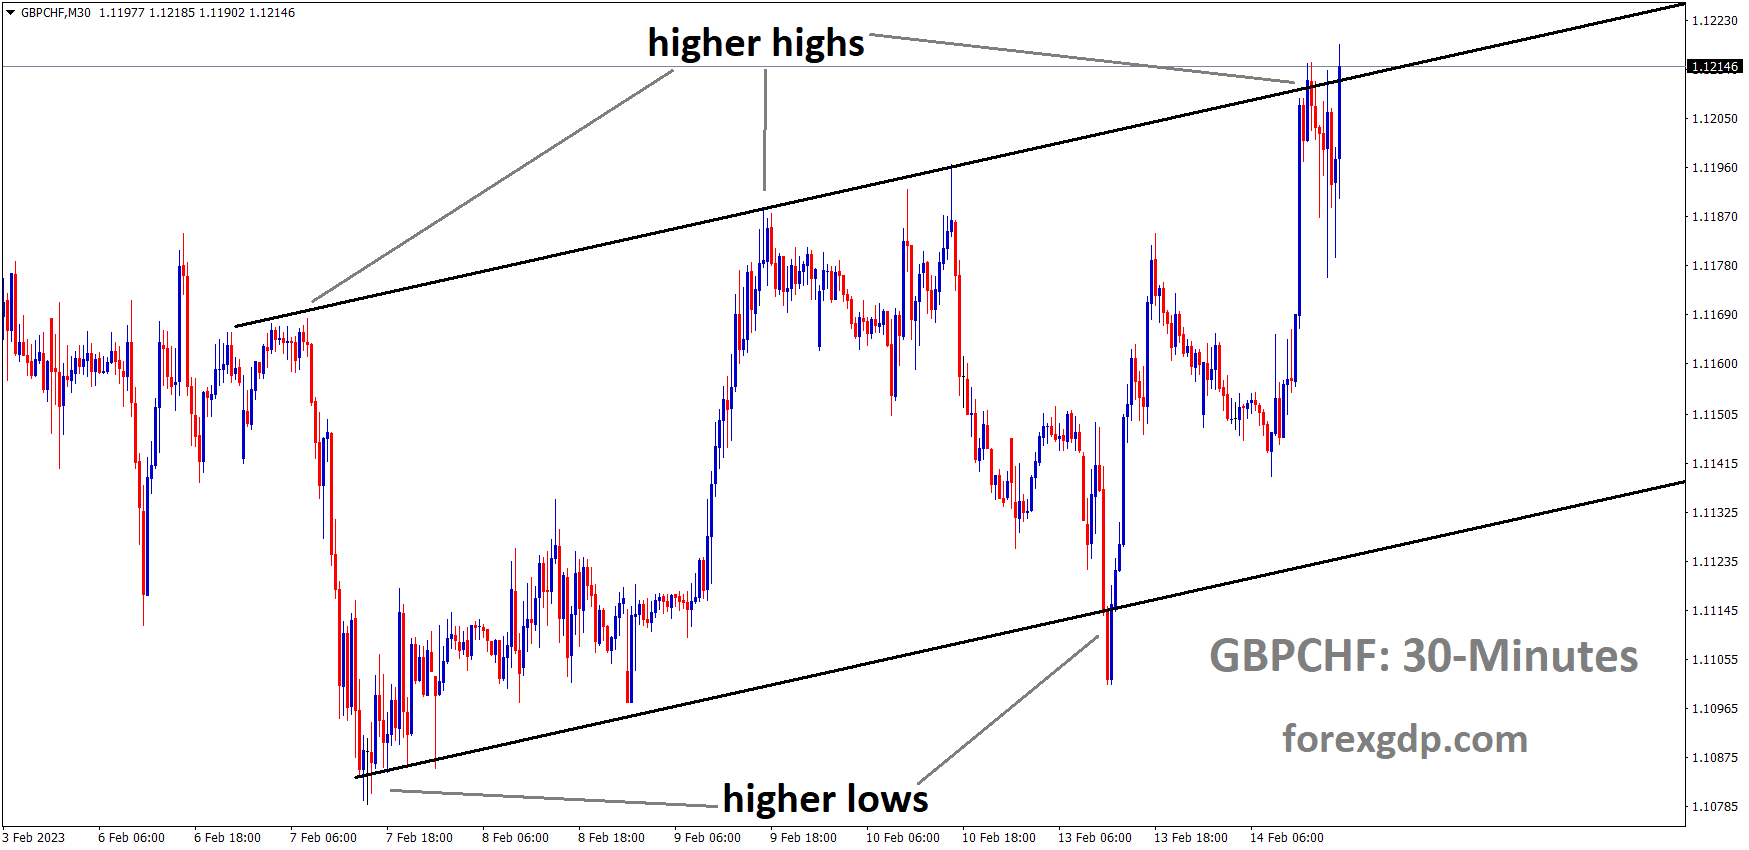 GBPCHF M30 TF analysis Market is moving in an Ascending channel and the market has reached the higher high area of the channel